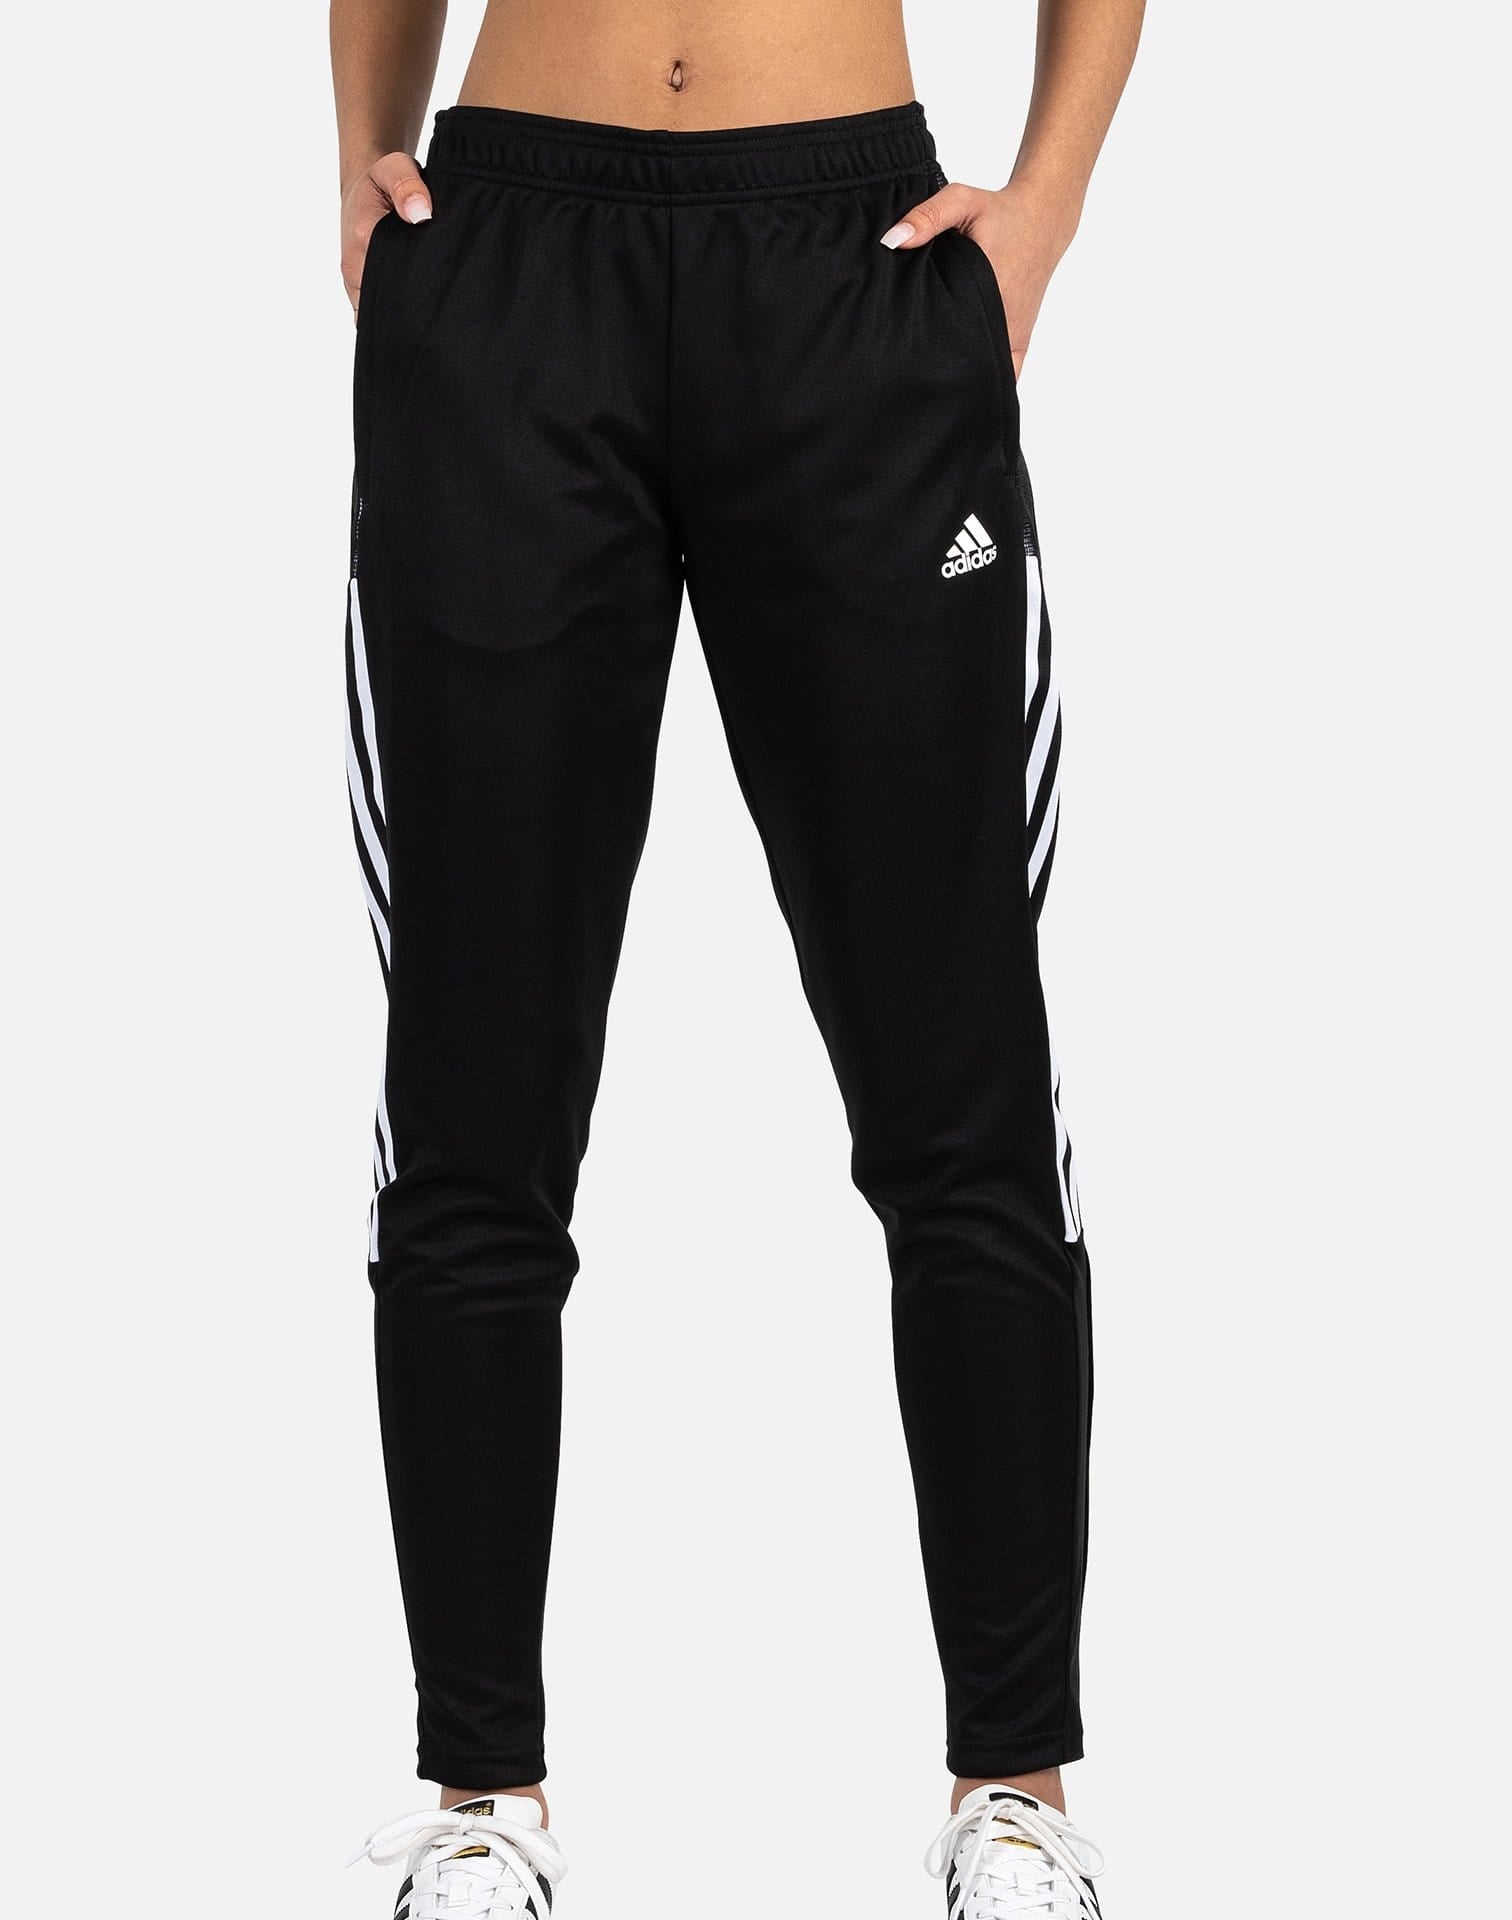 adidas Essentials Warmup Tricot Regular 3stripes Track Pants in Pink   Lyst